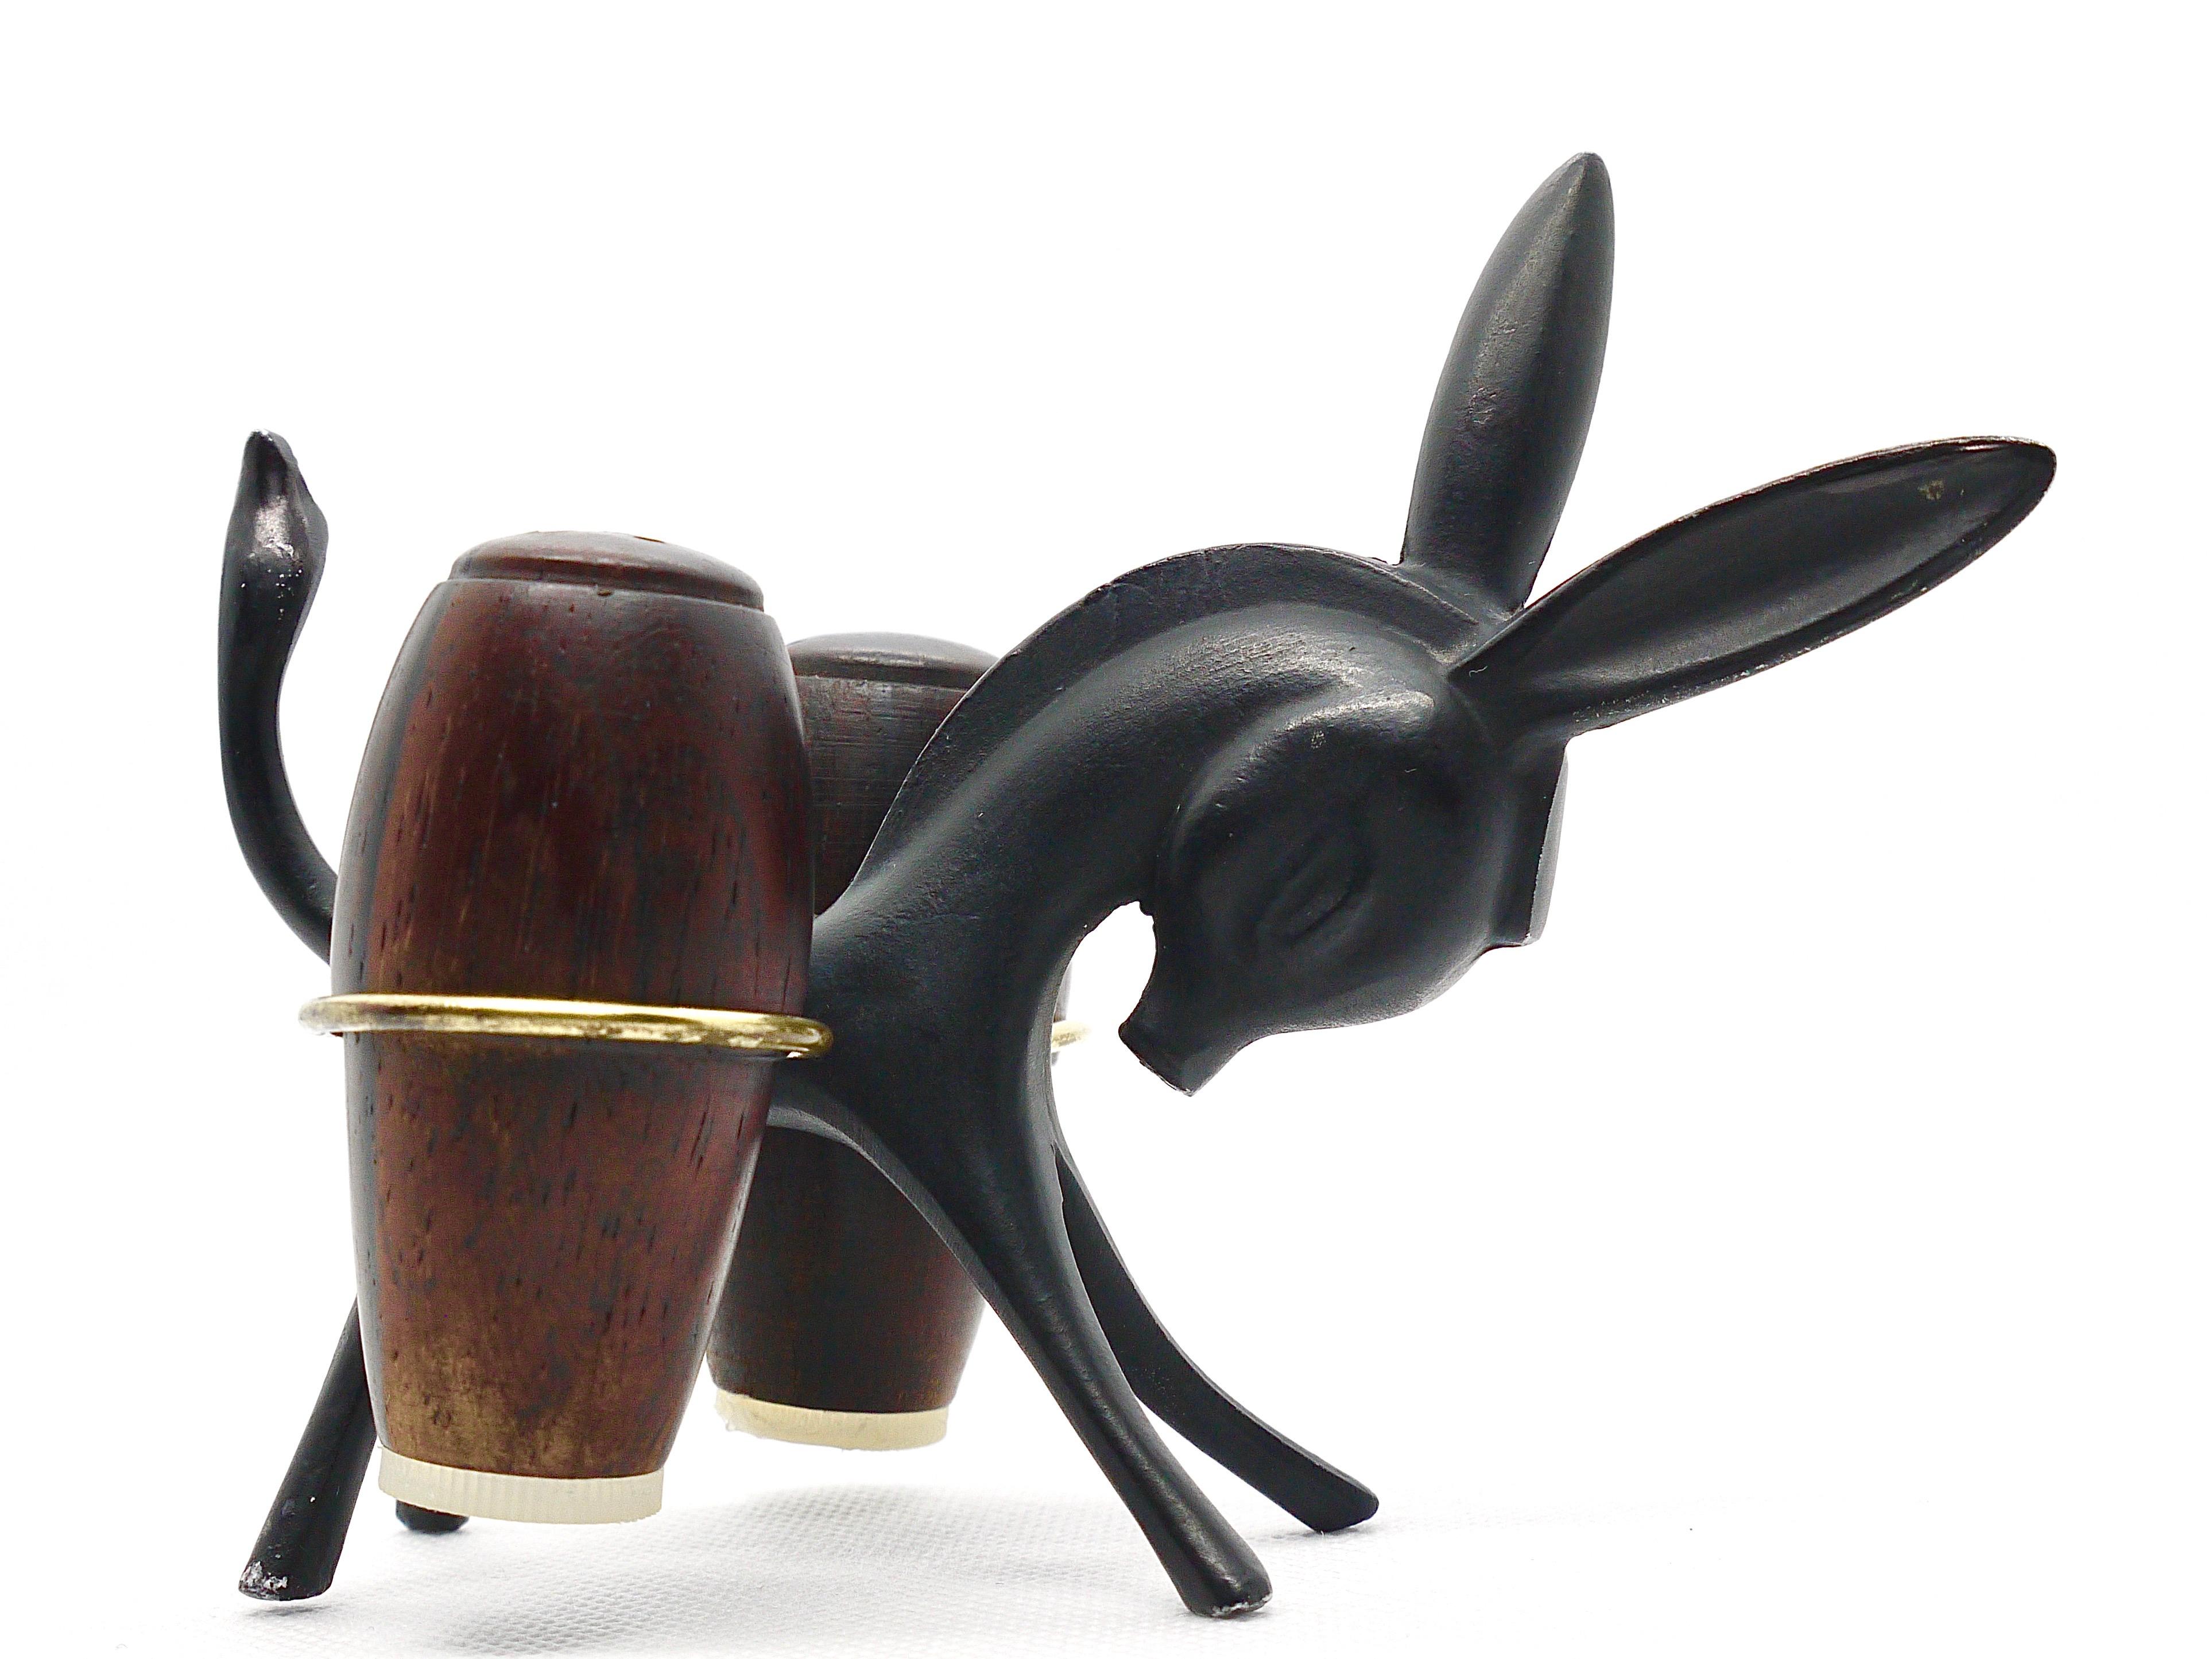 A charming Austrian midcentury Shaker set, displaying a donkey. A very humorous design by Walter Bosse, executed by Hertha Baller Austria in the 1950s. Made of metal and walnut wood. In very good condition with marginal patina.